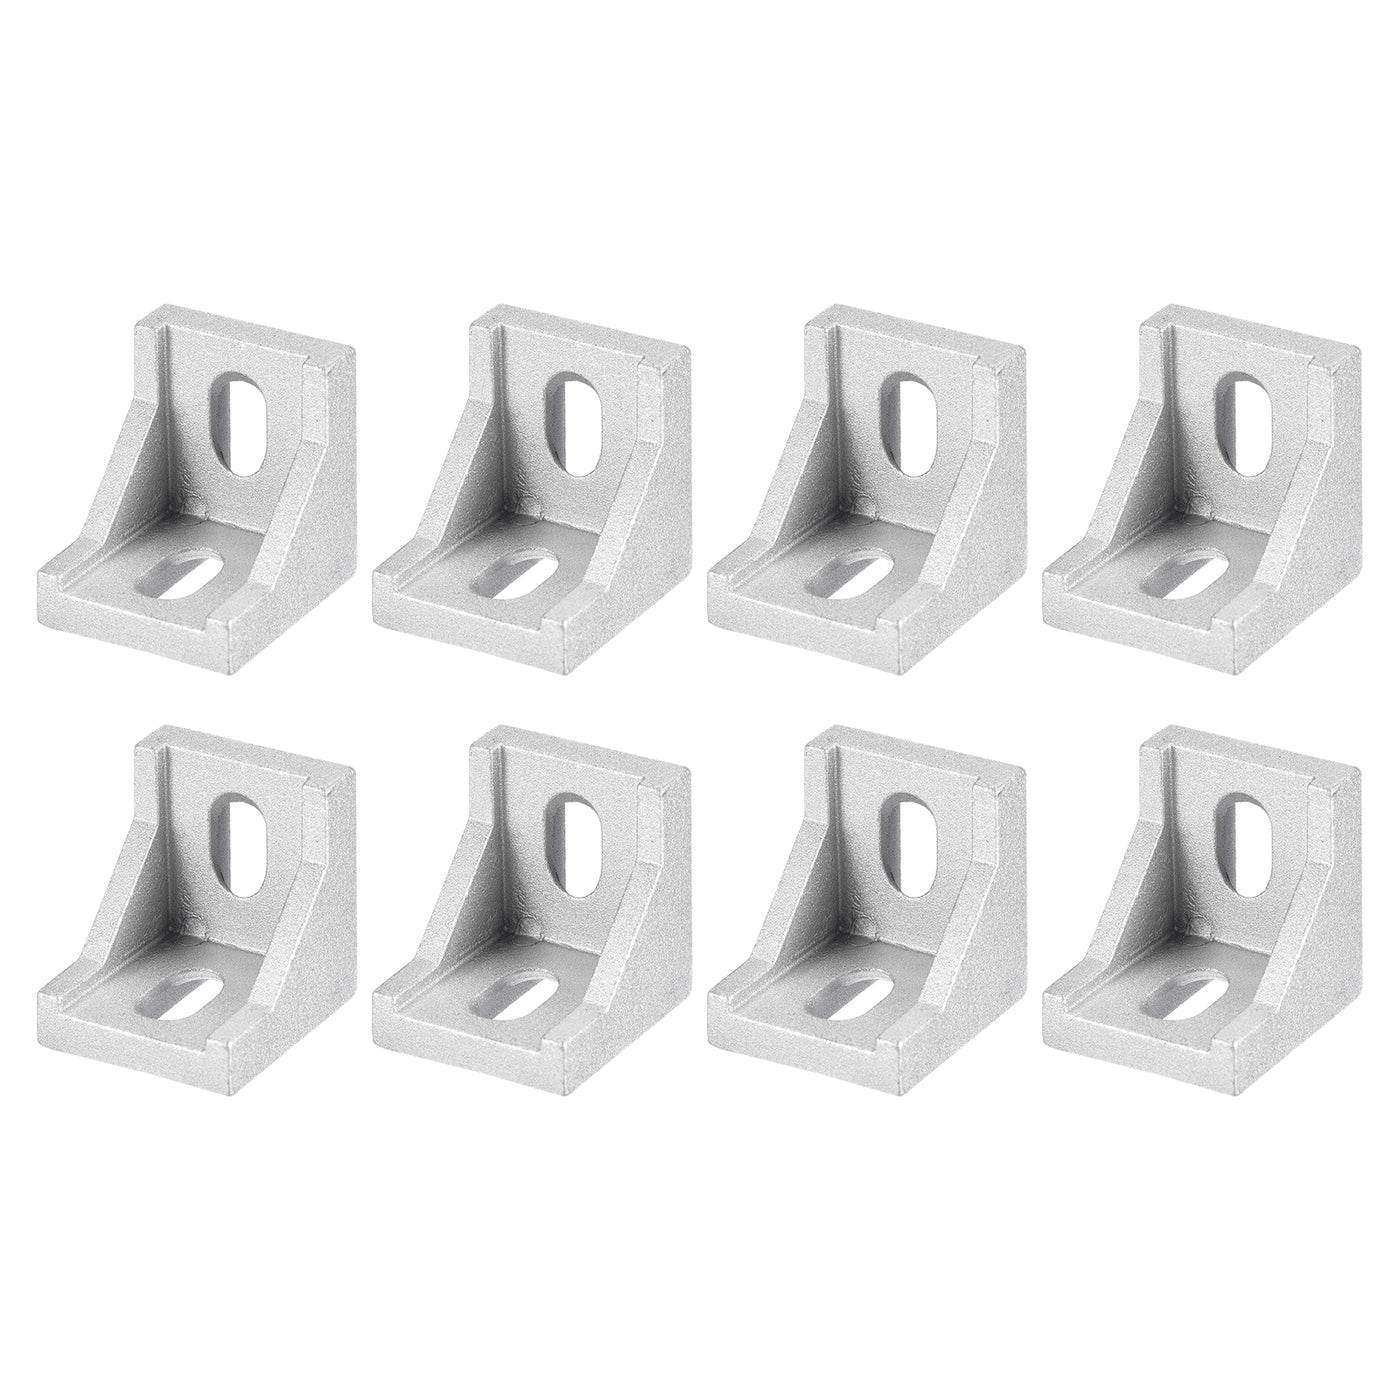 Uxcell Uxcell 8Pcs Inside Corner Bracket Gusset, 38x38x35mm 4040 Thicken Angle Connectors for 4040/4080 Series Aluminum Extrusion Profile Silver